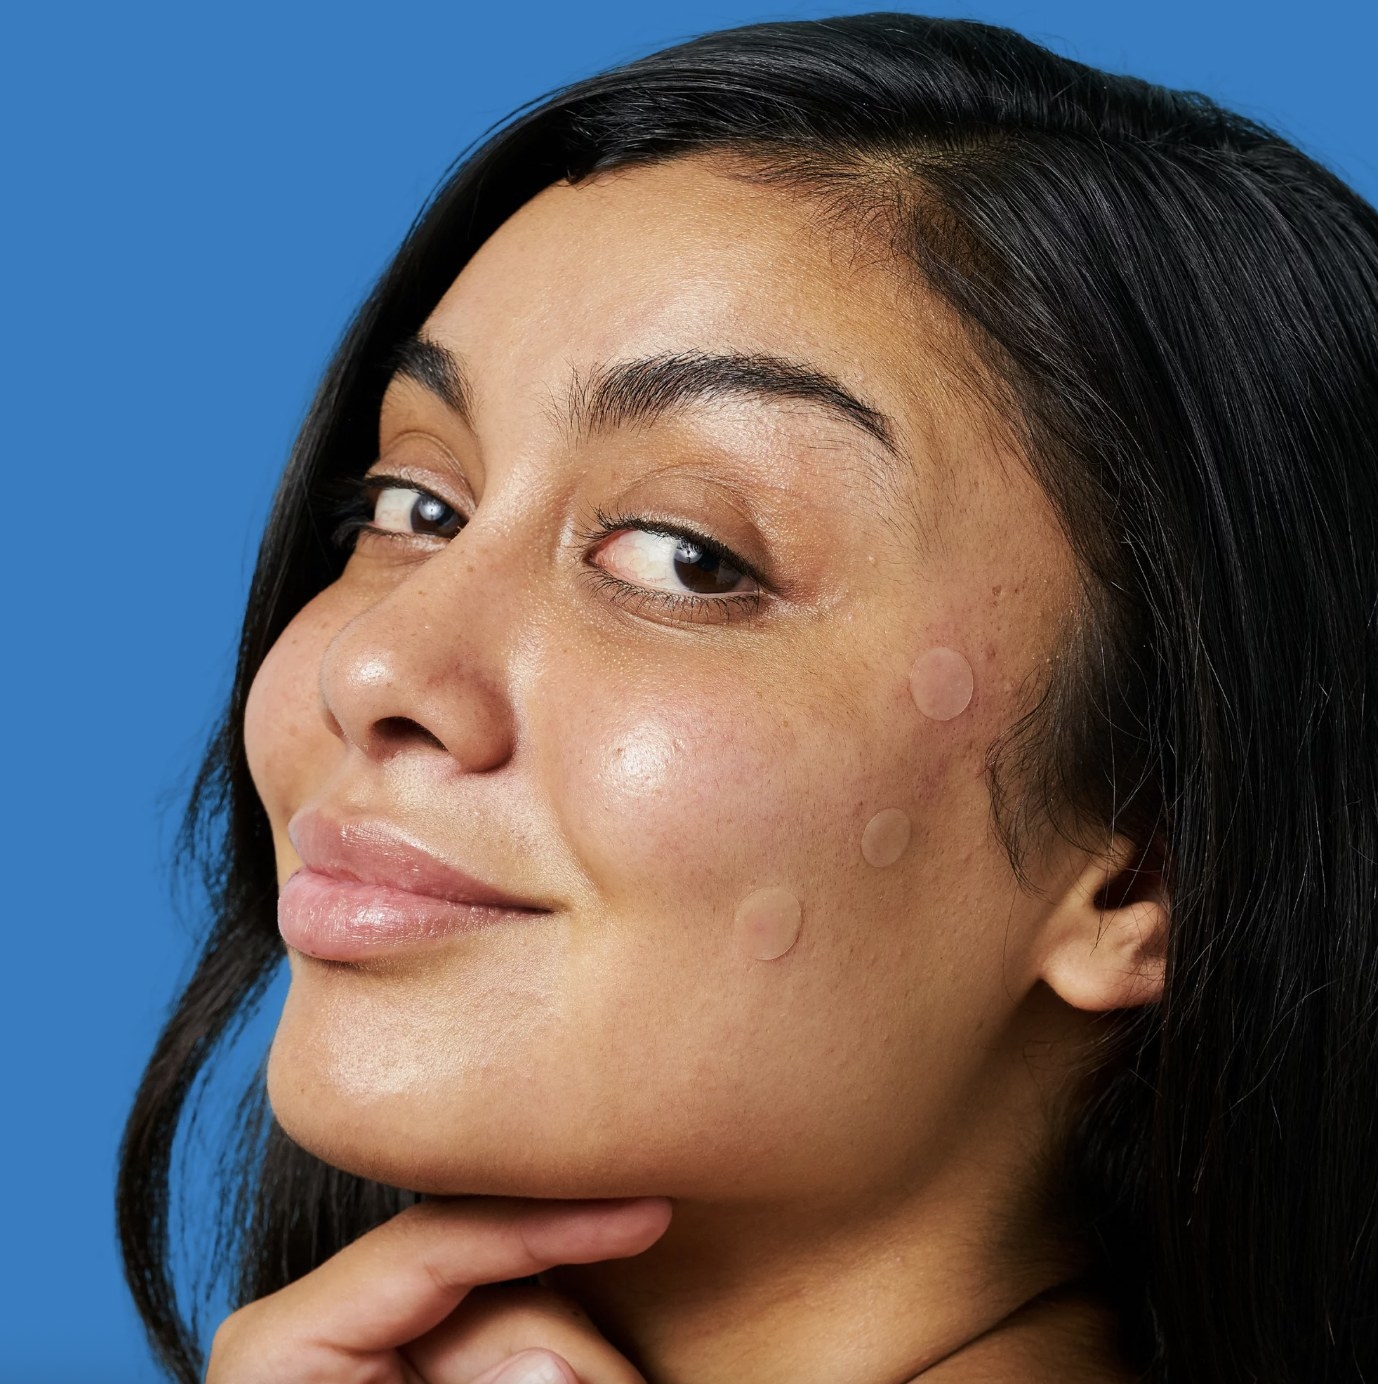 A person using acne patches